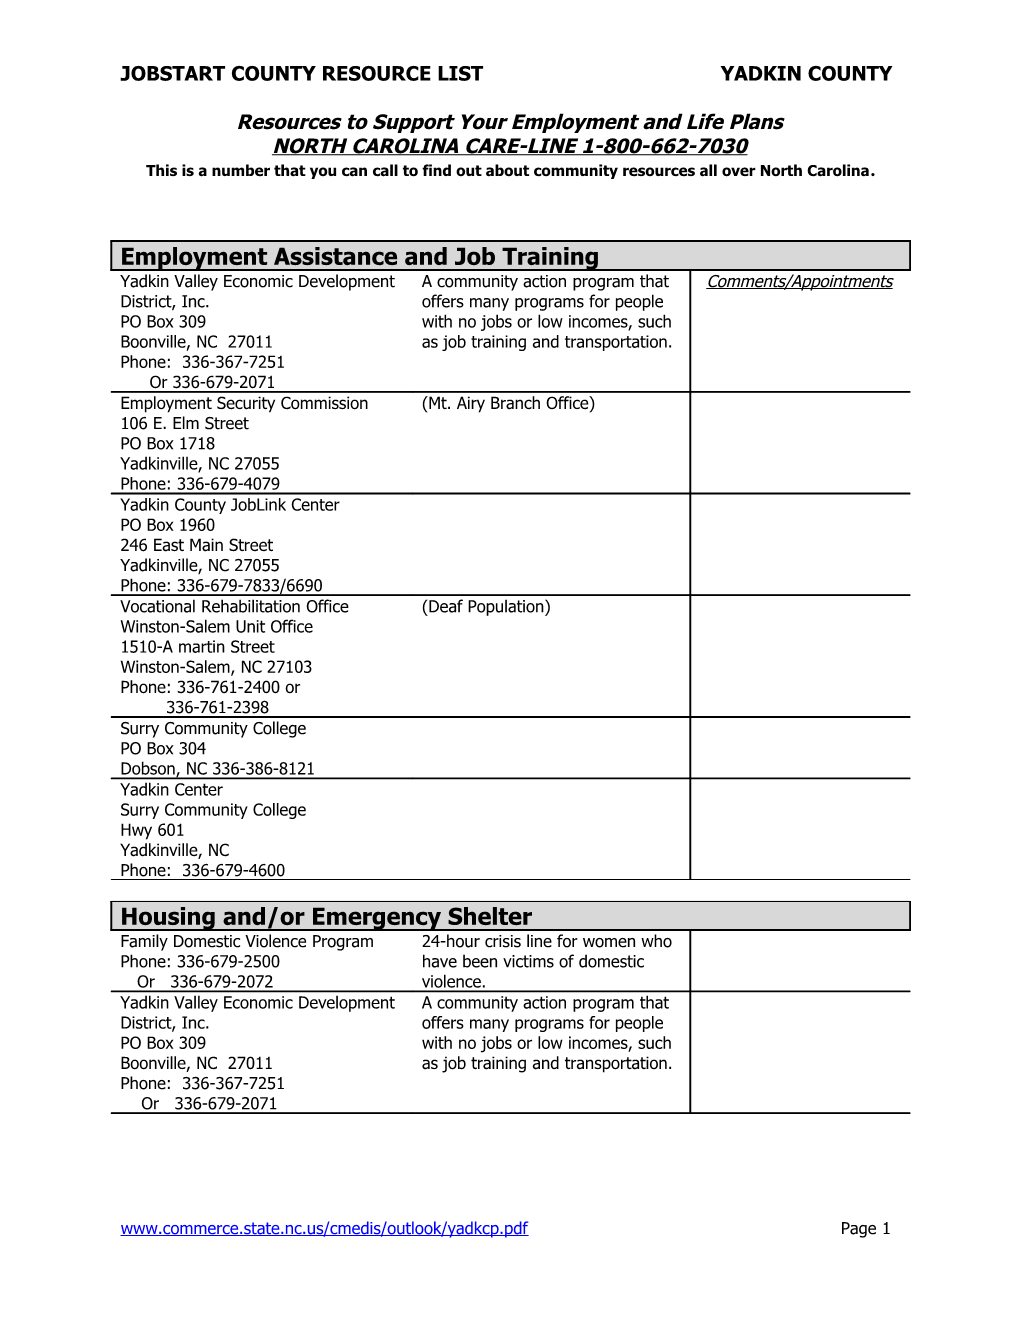 Employment Assistance and Job Training